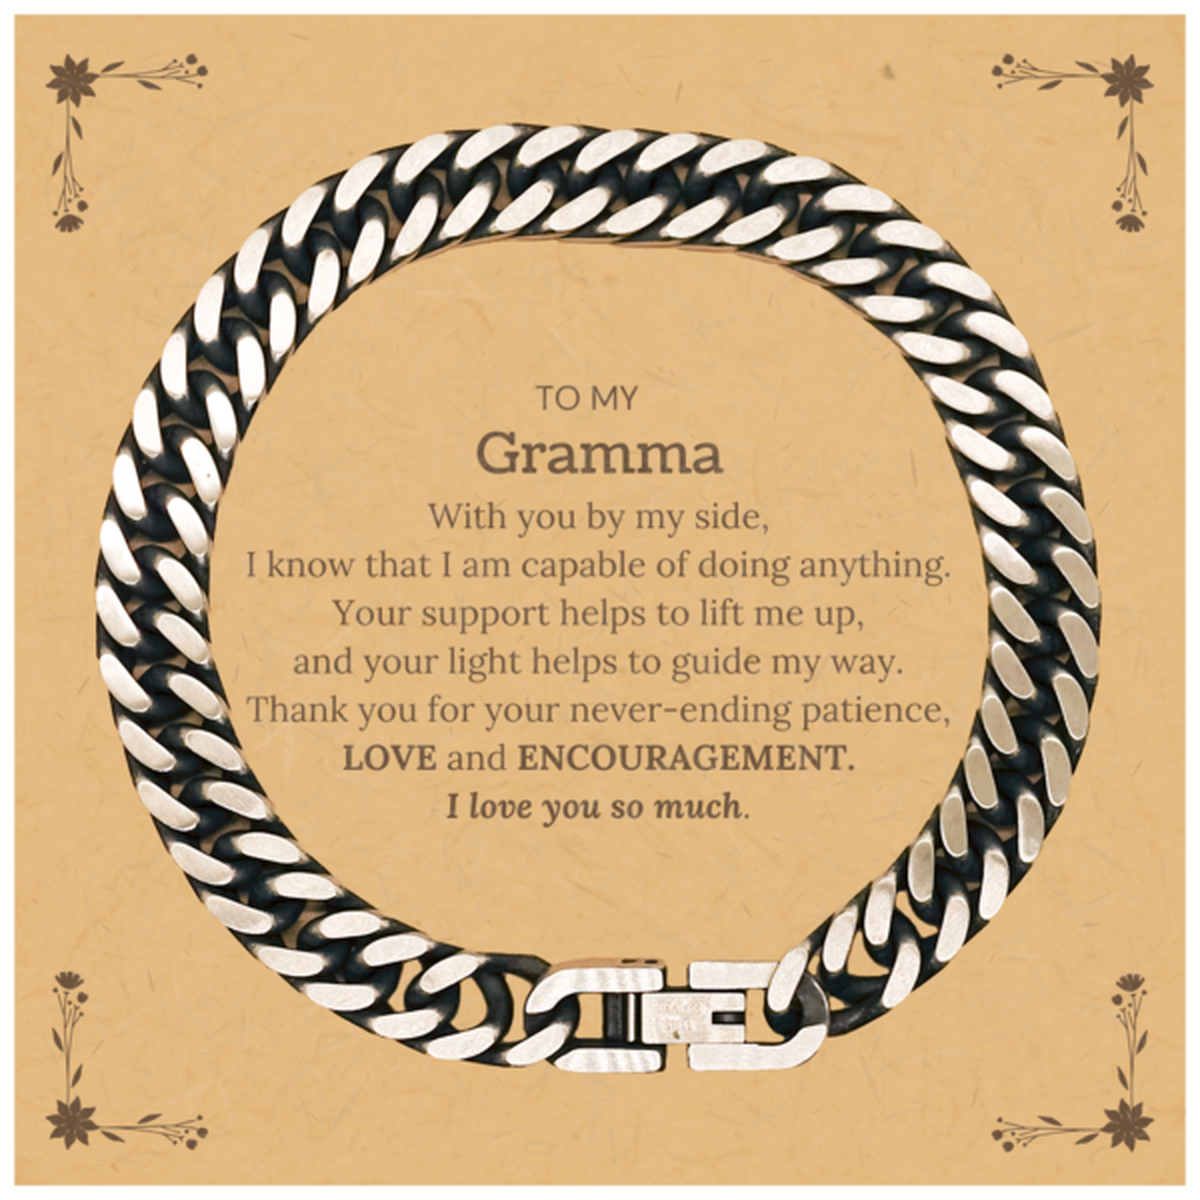 Appreciation Gramma Cuban Link Chain Bracelet Gifts, To My Gramma Birthday Christmas Wedding Keepsake Gifts for Gramma With you by my side, I know that I am capable of doing anything. I love you so much